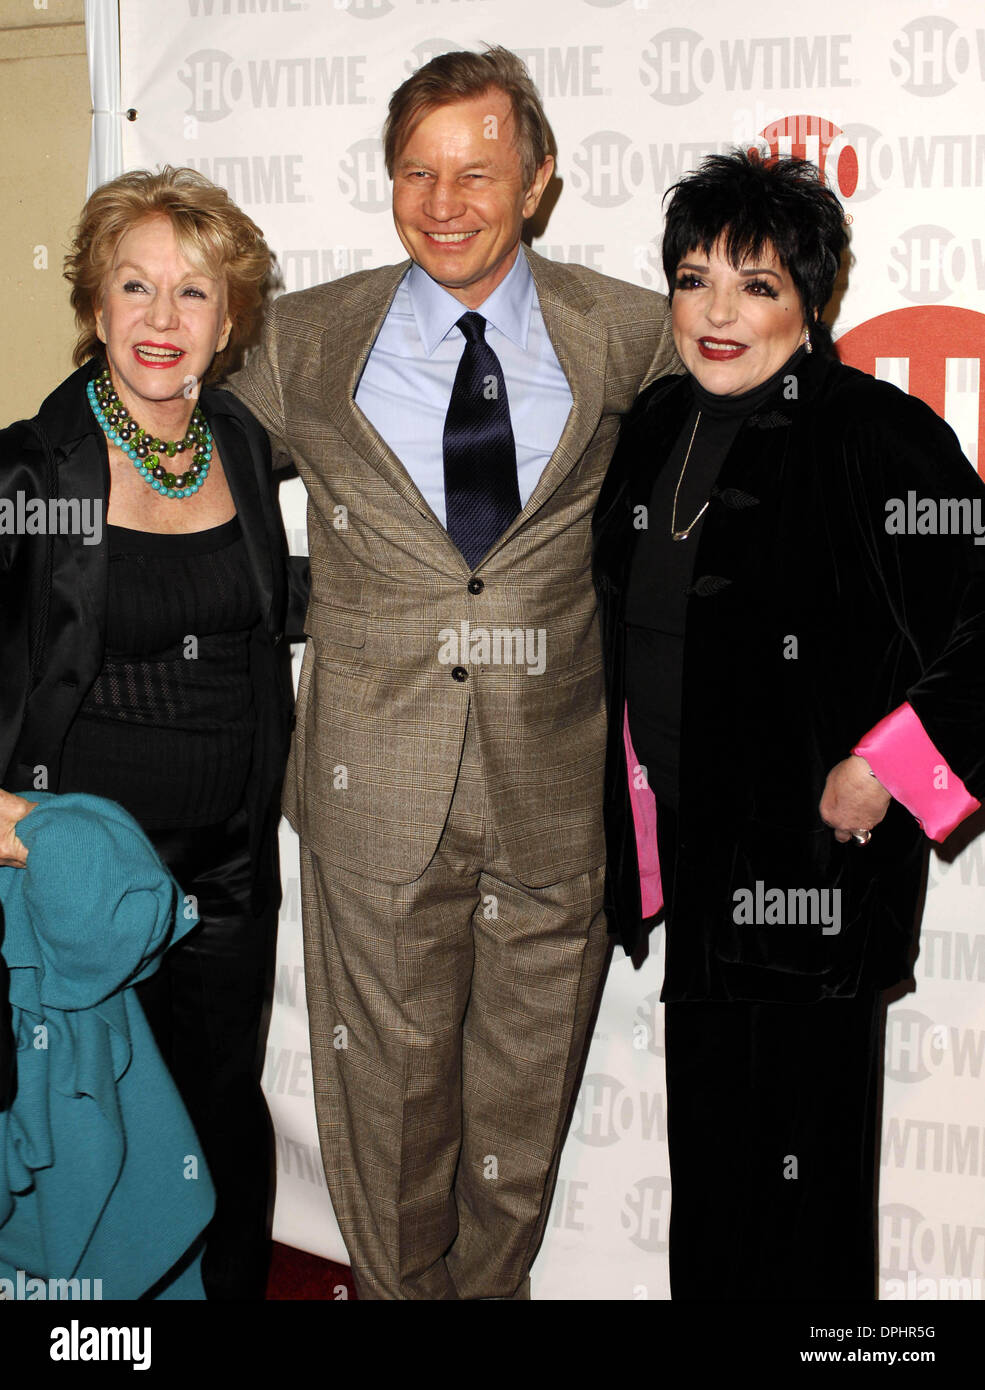 Mar. 21, 2006 - Hollywood, California, U.S. - LOS ANGELES CA MARCH 21, 2006 (SSI) - -.Patricia McCallum, her husband, actor Michael York and actress Liza Minnelli pose for photographers, during the premiere of the restored and re-mastered 1972 Bob Fosse TV concert event LIZA WITH A Z, held at the MGM Screening Room, on March 21, 2006, in Century City, Los Angeles.   / Super Star Im Stock Photo